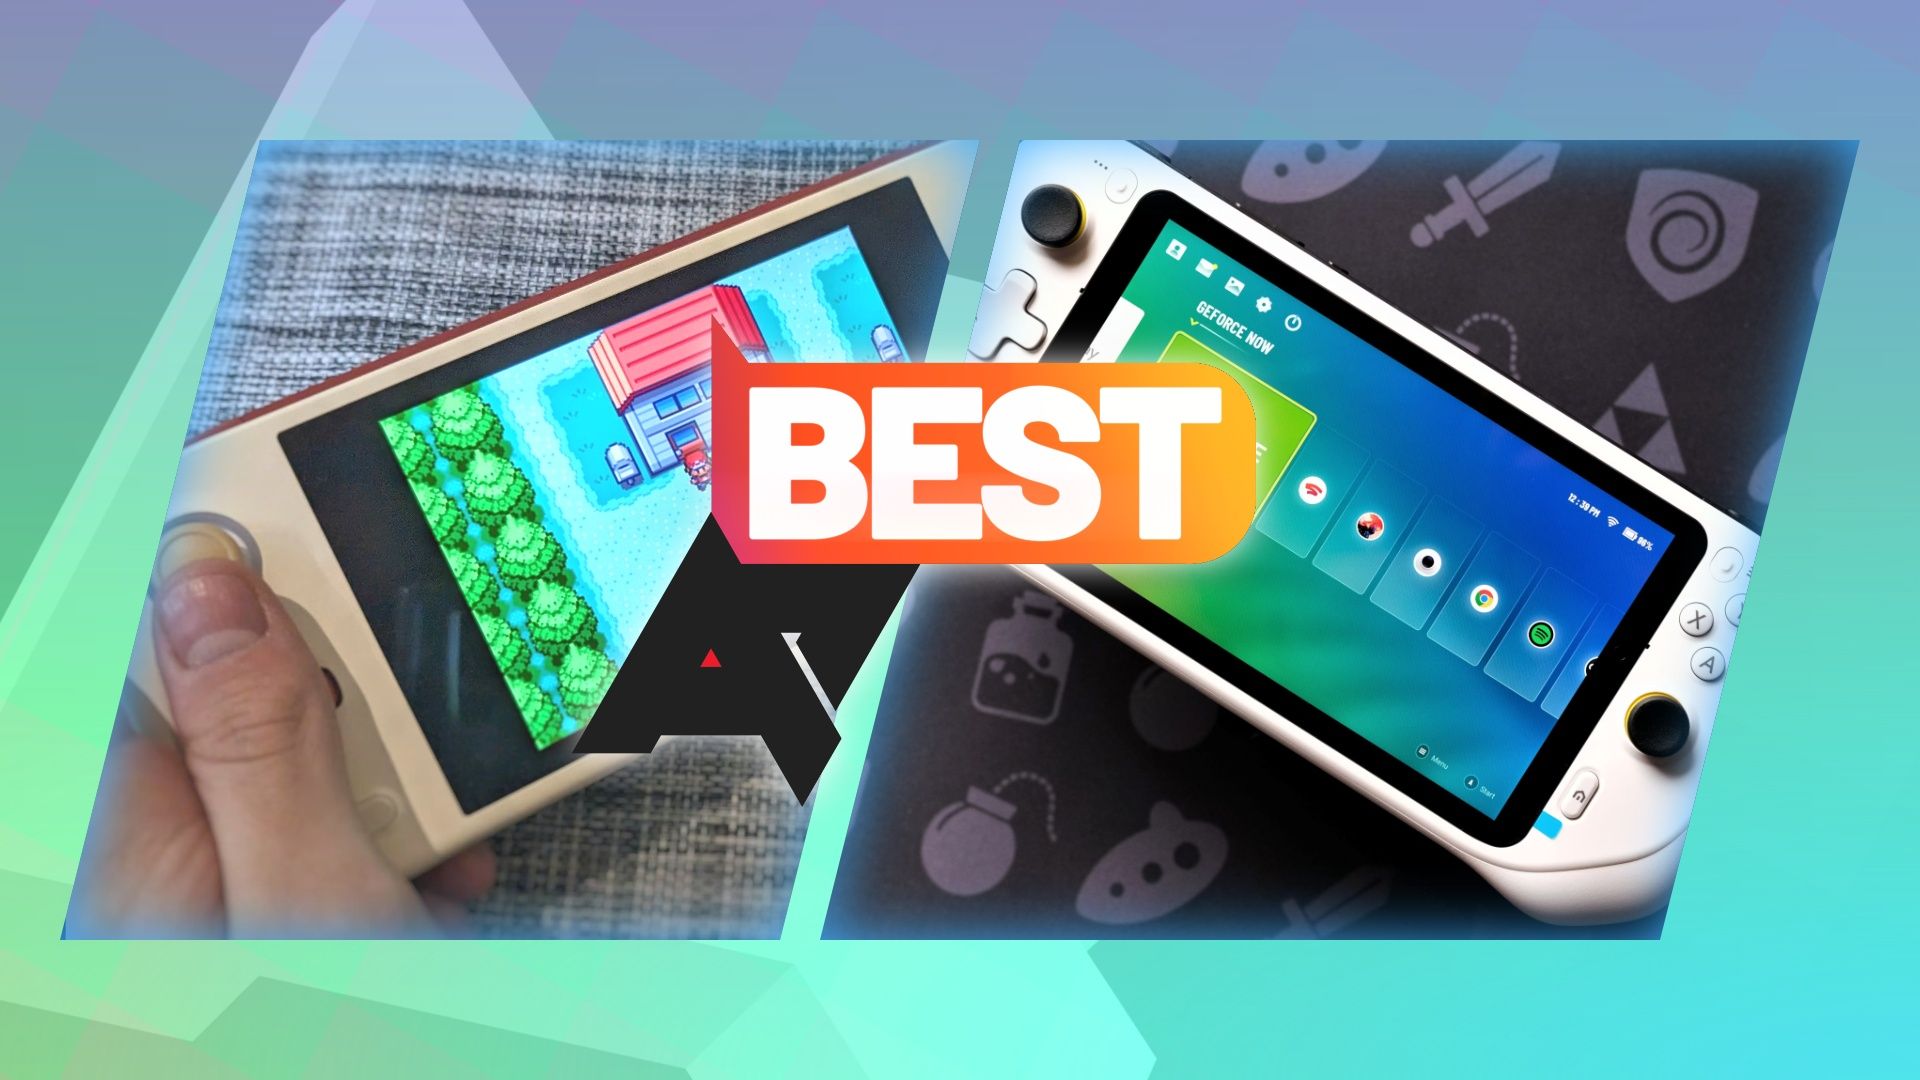 Photos of two Android gaming handhelds with an AP Best logo